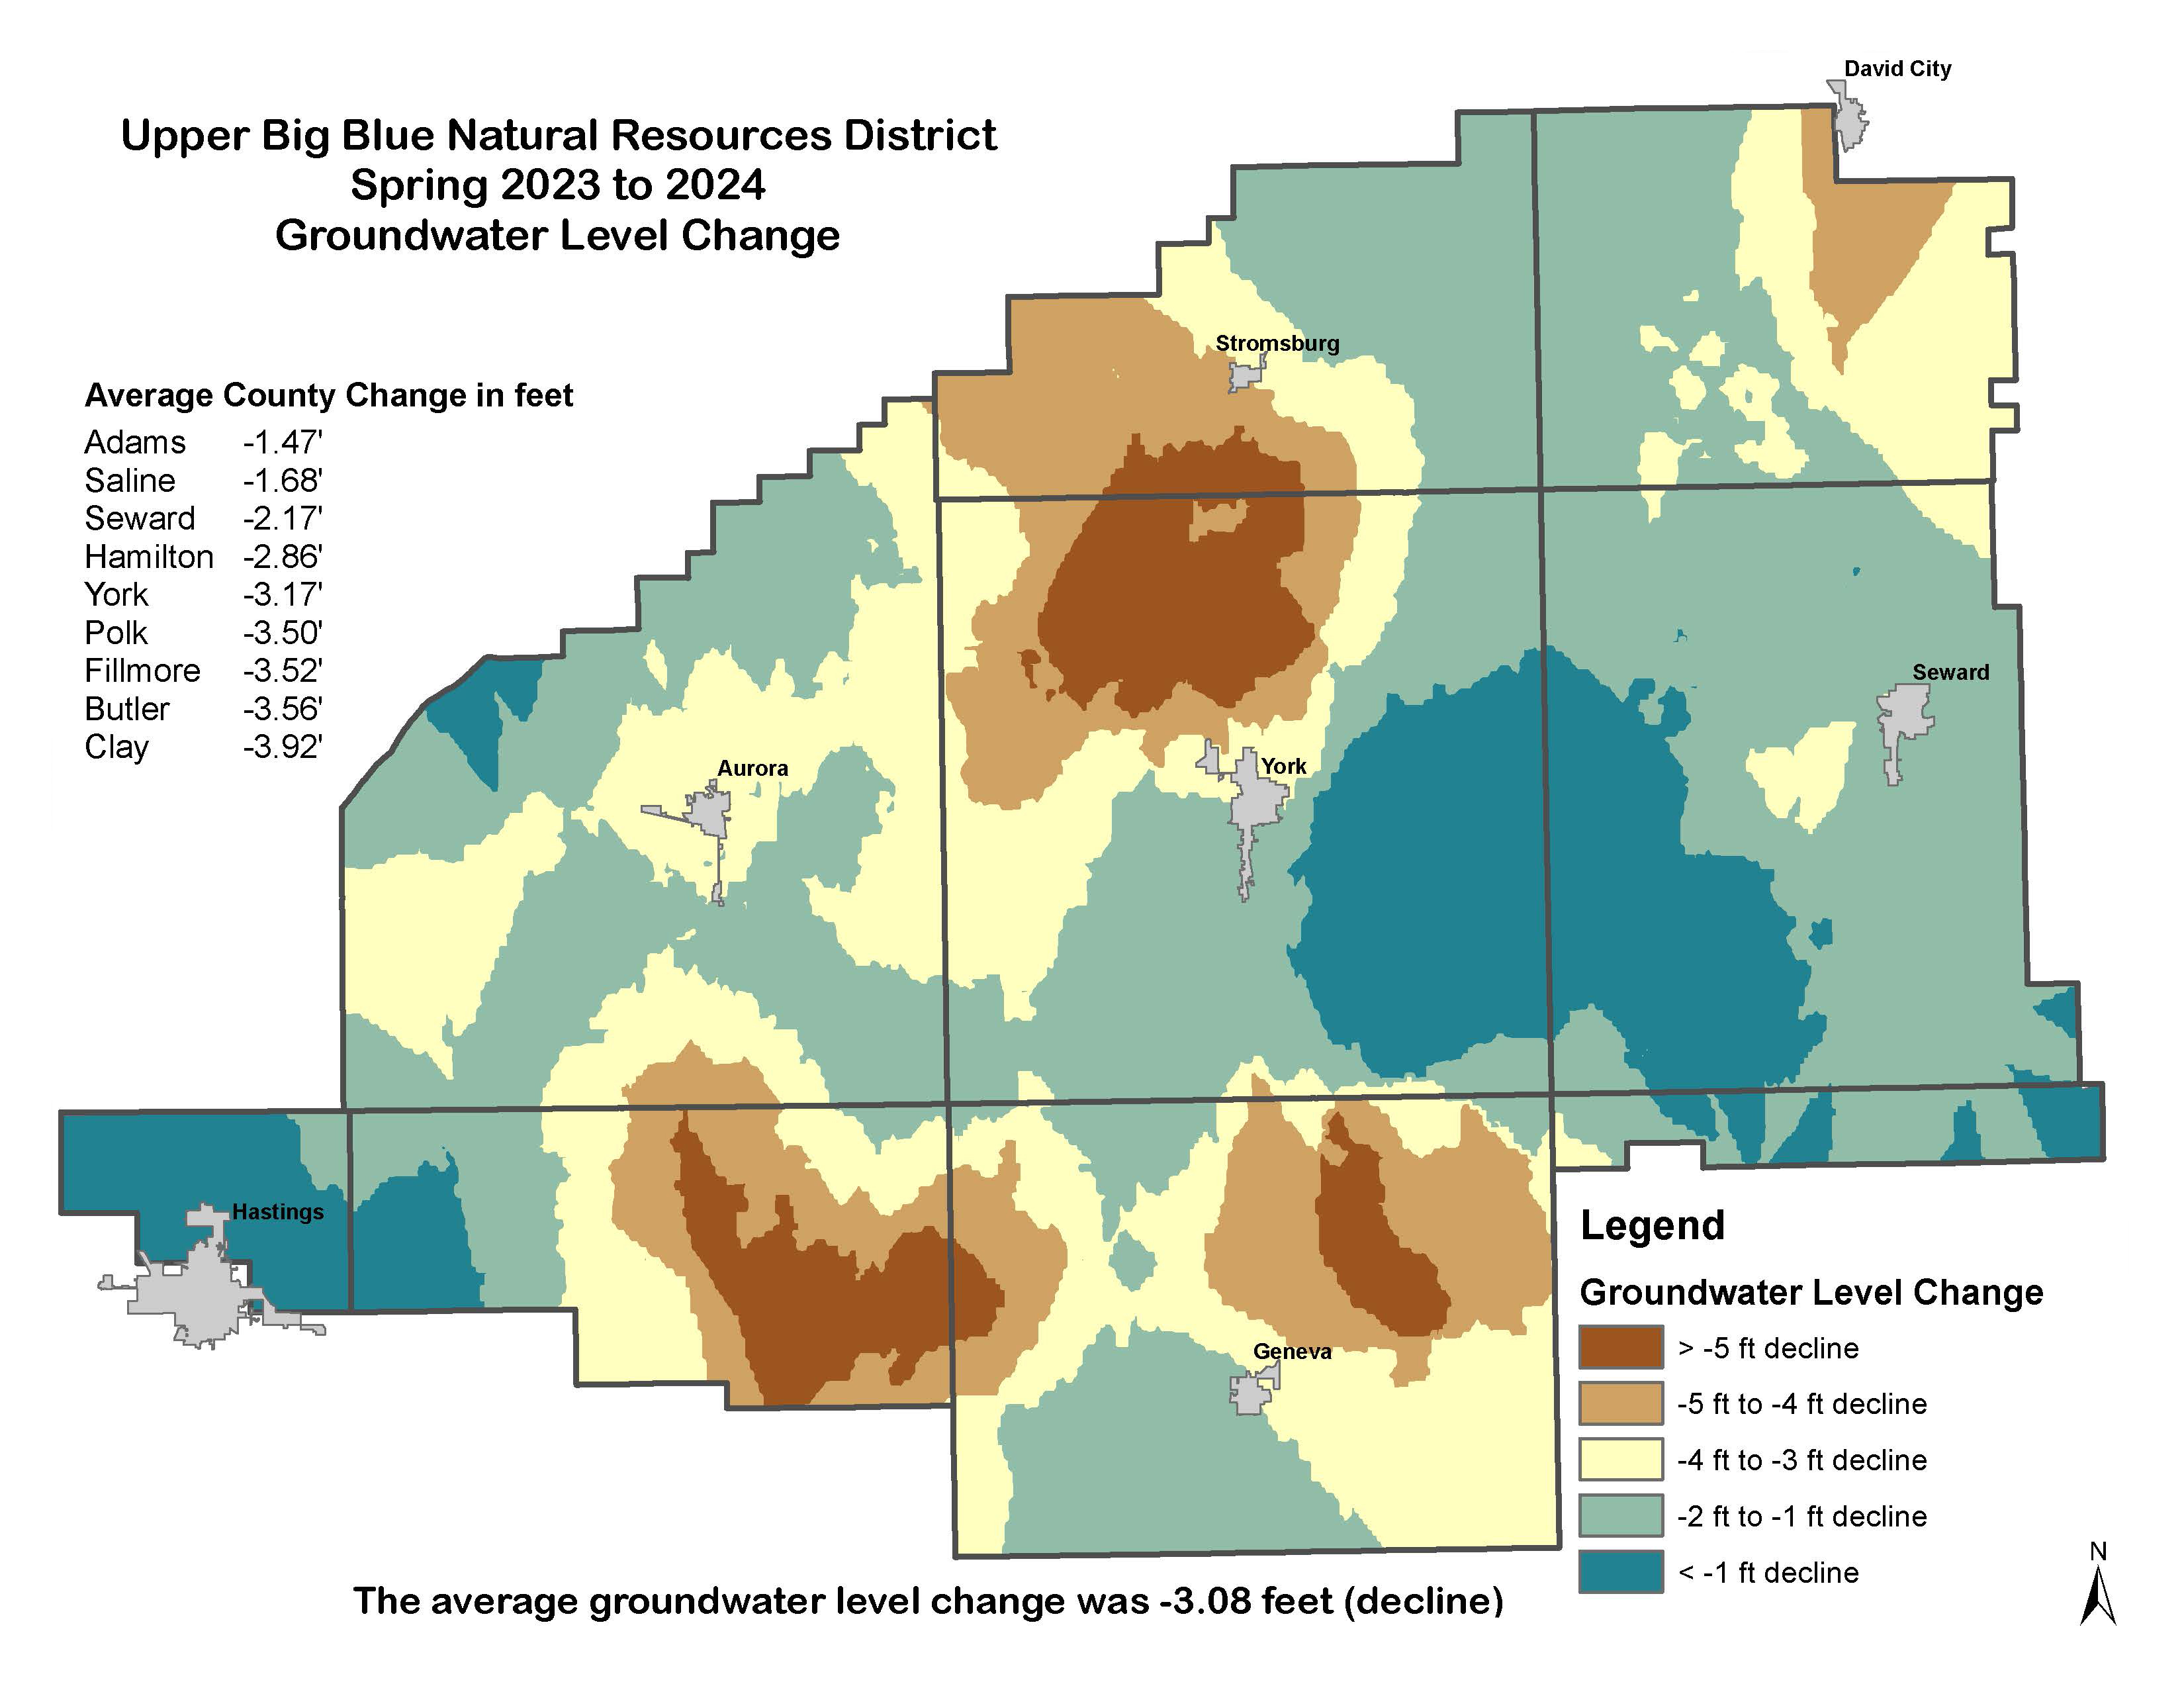 spring groundwater level change